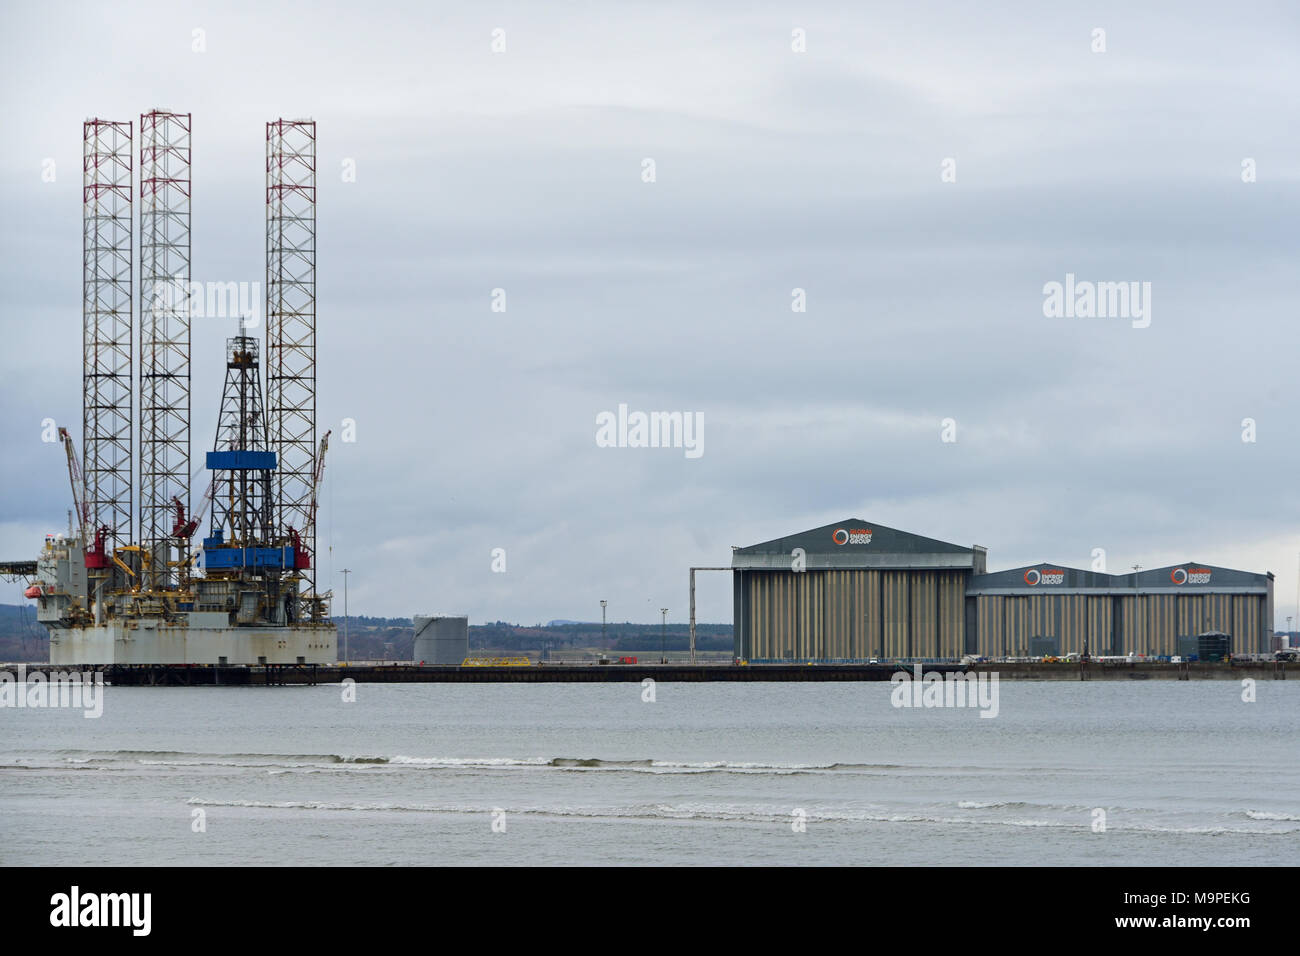 Cromarty, Scotland, United Kingdom, 27, March, 2018. Global Energy Group yard at Nigg Energy Park on the Cromarty Firth, © Ken Jack / Alamy Live News Stock Photo